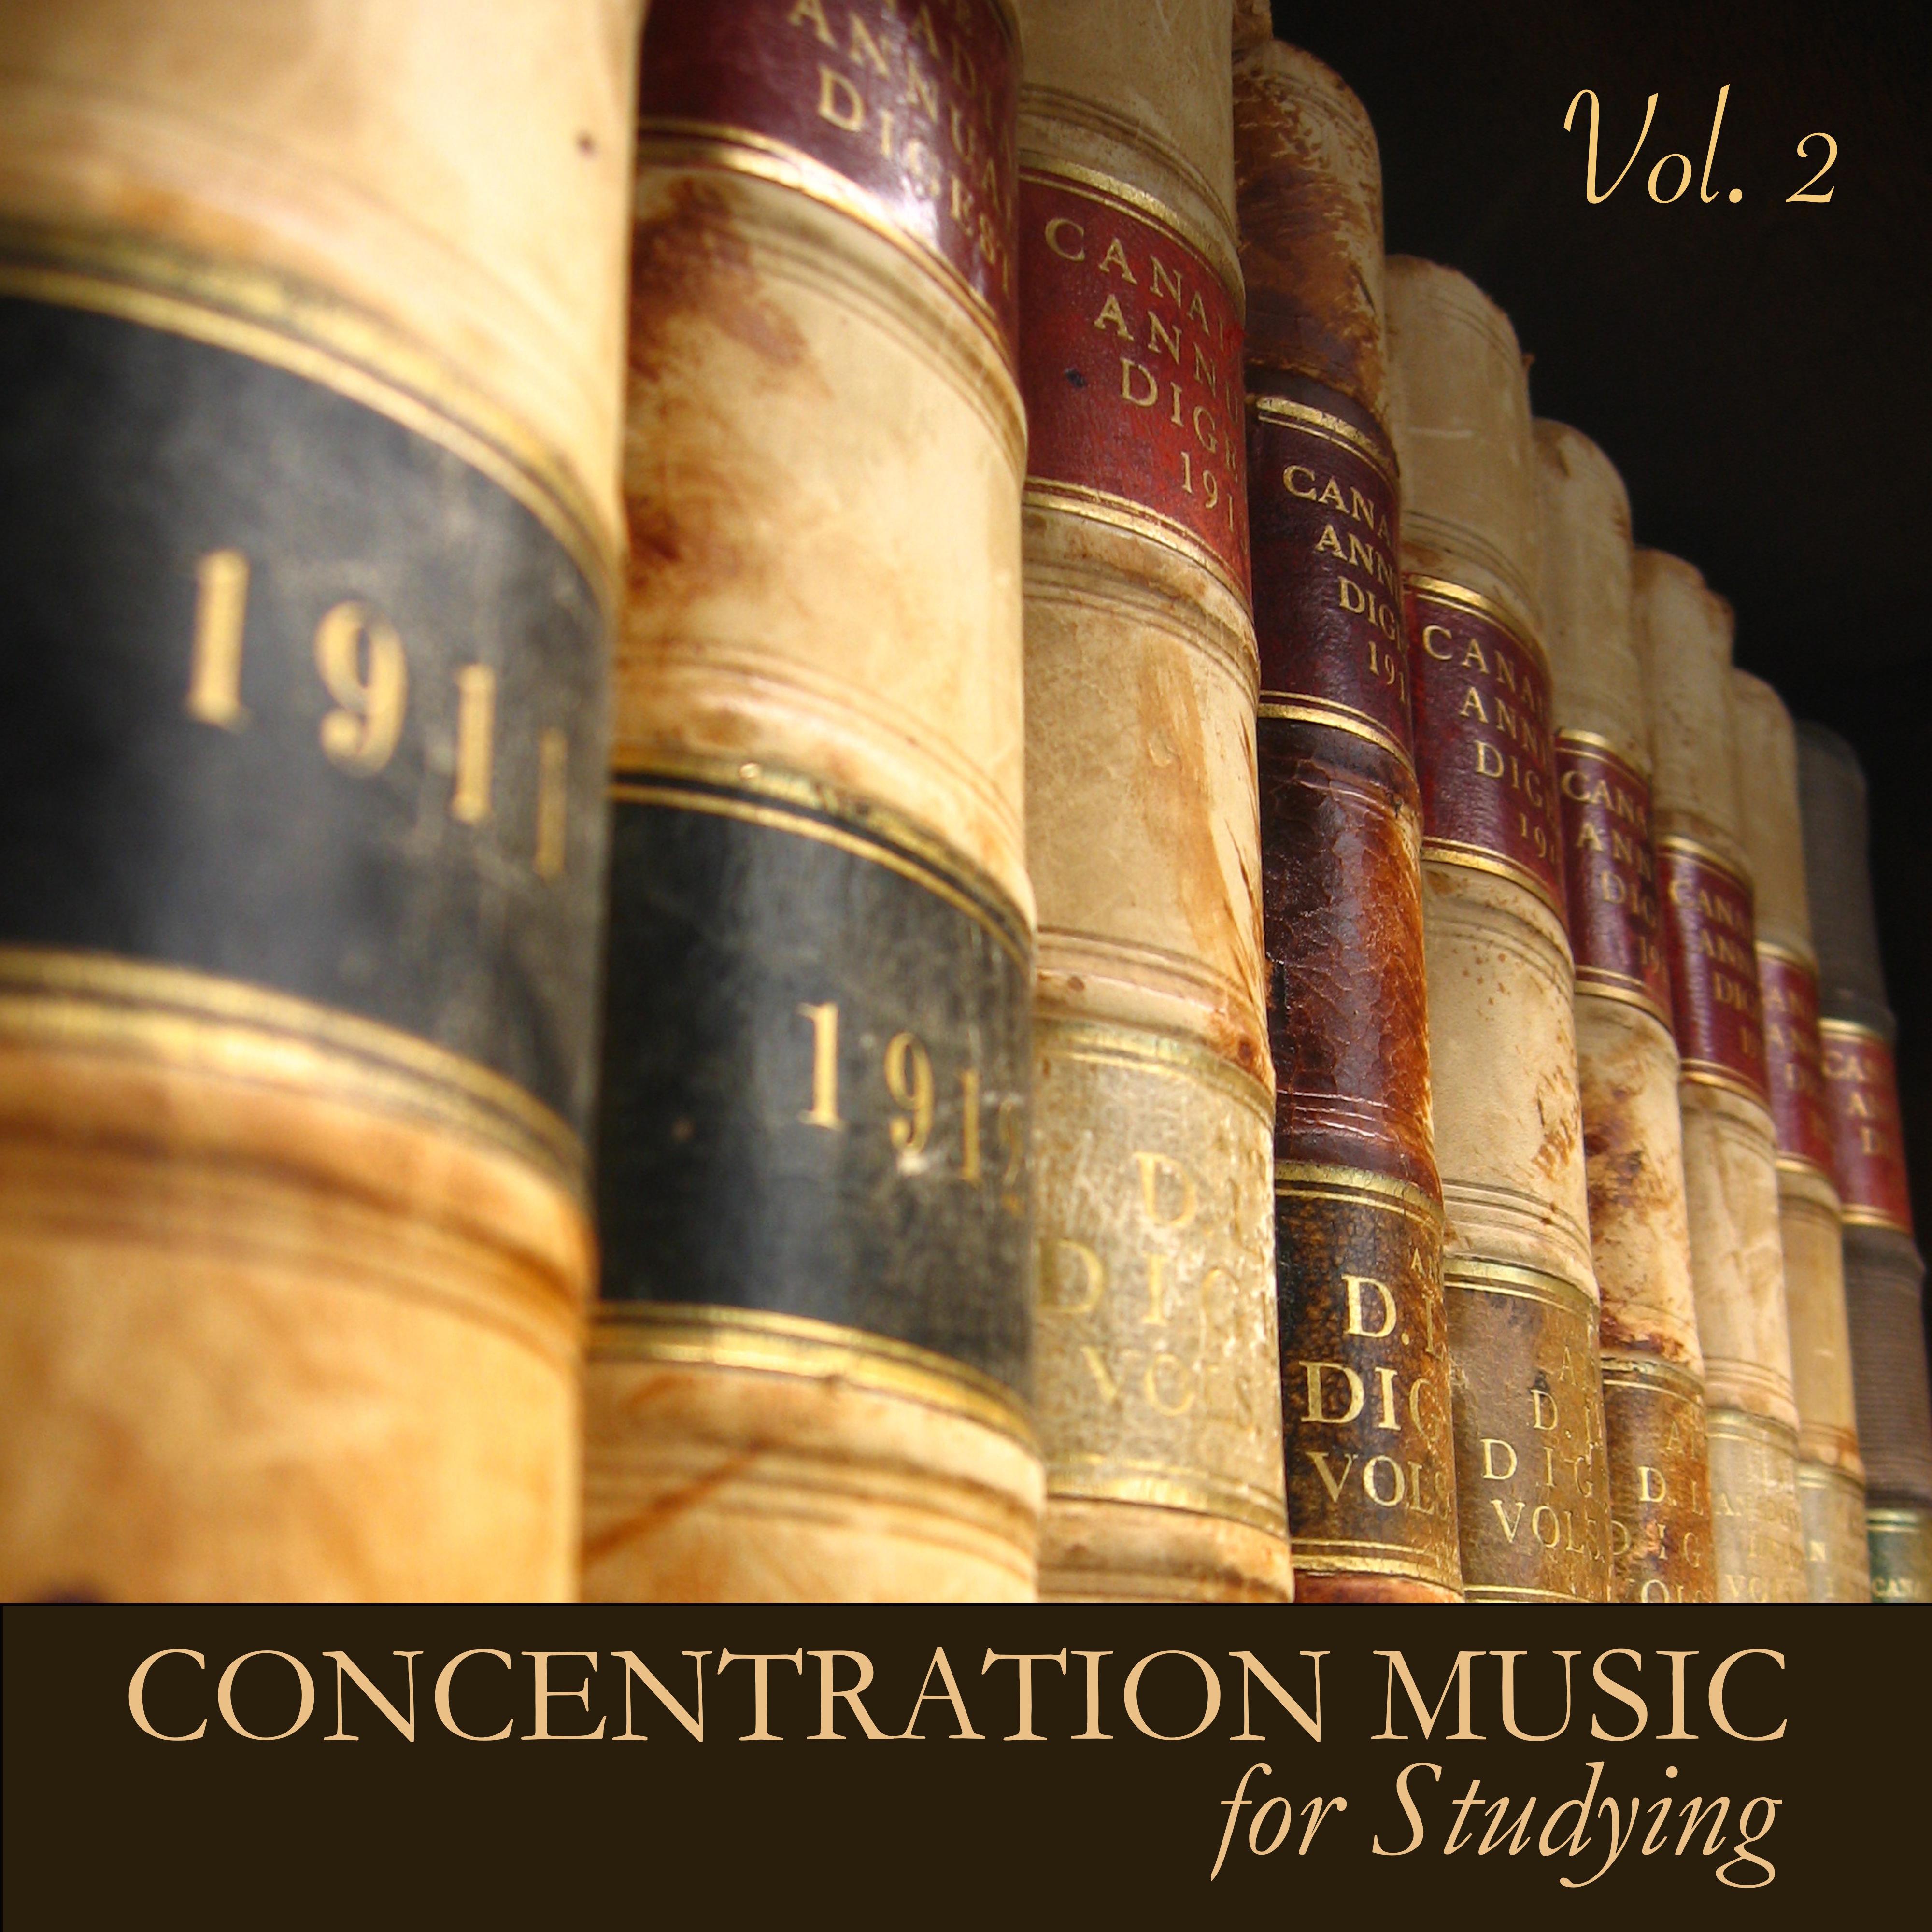 Concentration Music for Studying Vol. 2 - Instrumental Study Music for Exam Study, to Focus on Learning, Improve Concentration and Brain Power